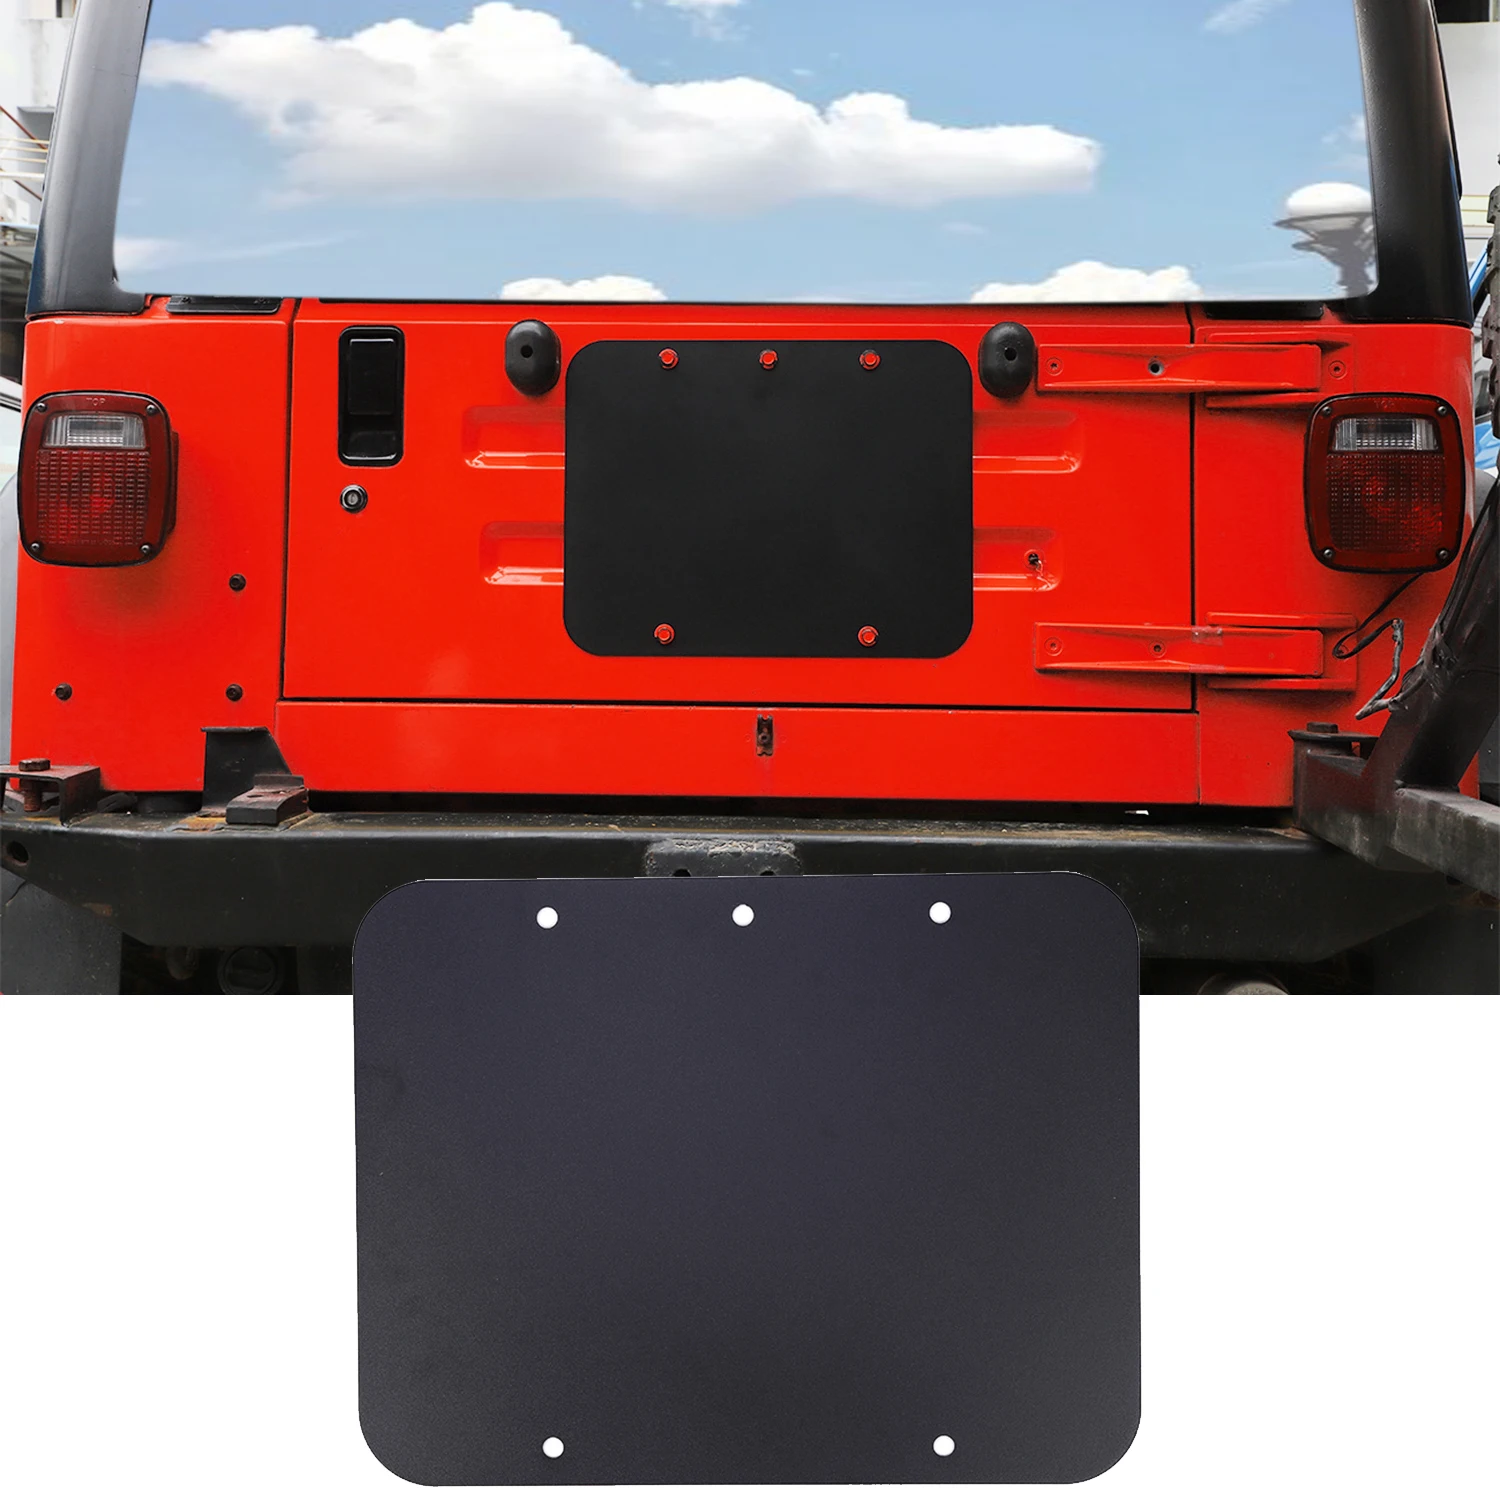 

TJ Tailgate Cover Spare Tire Carrier Delete Filler Plate for Jeep Wrangler TJ 1997-2006 Exterior Accessories Chromium Styling